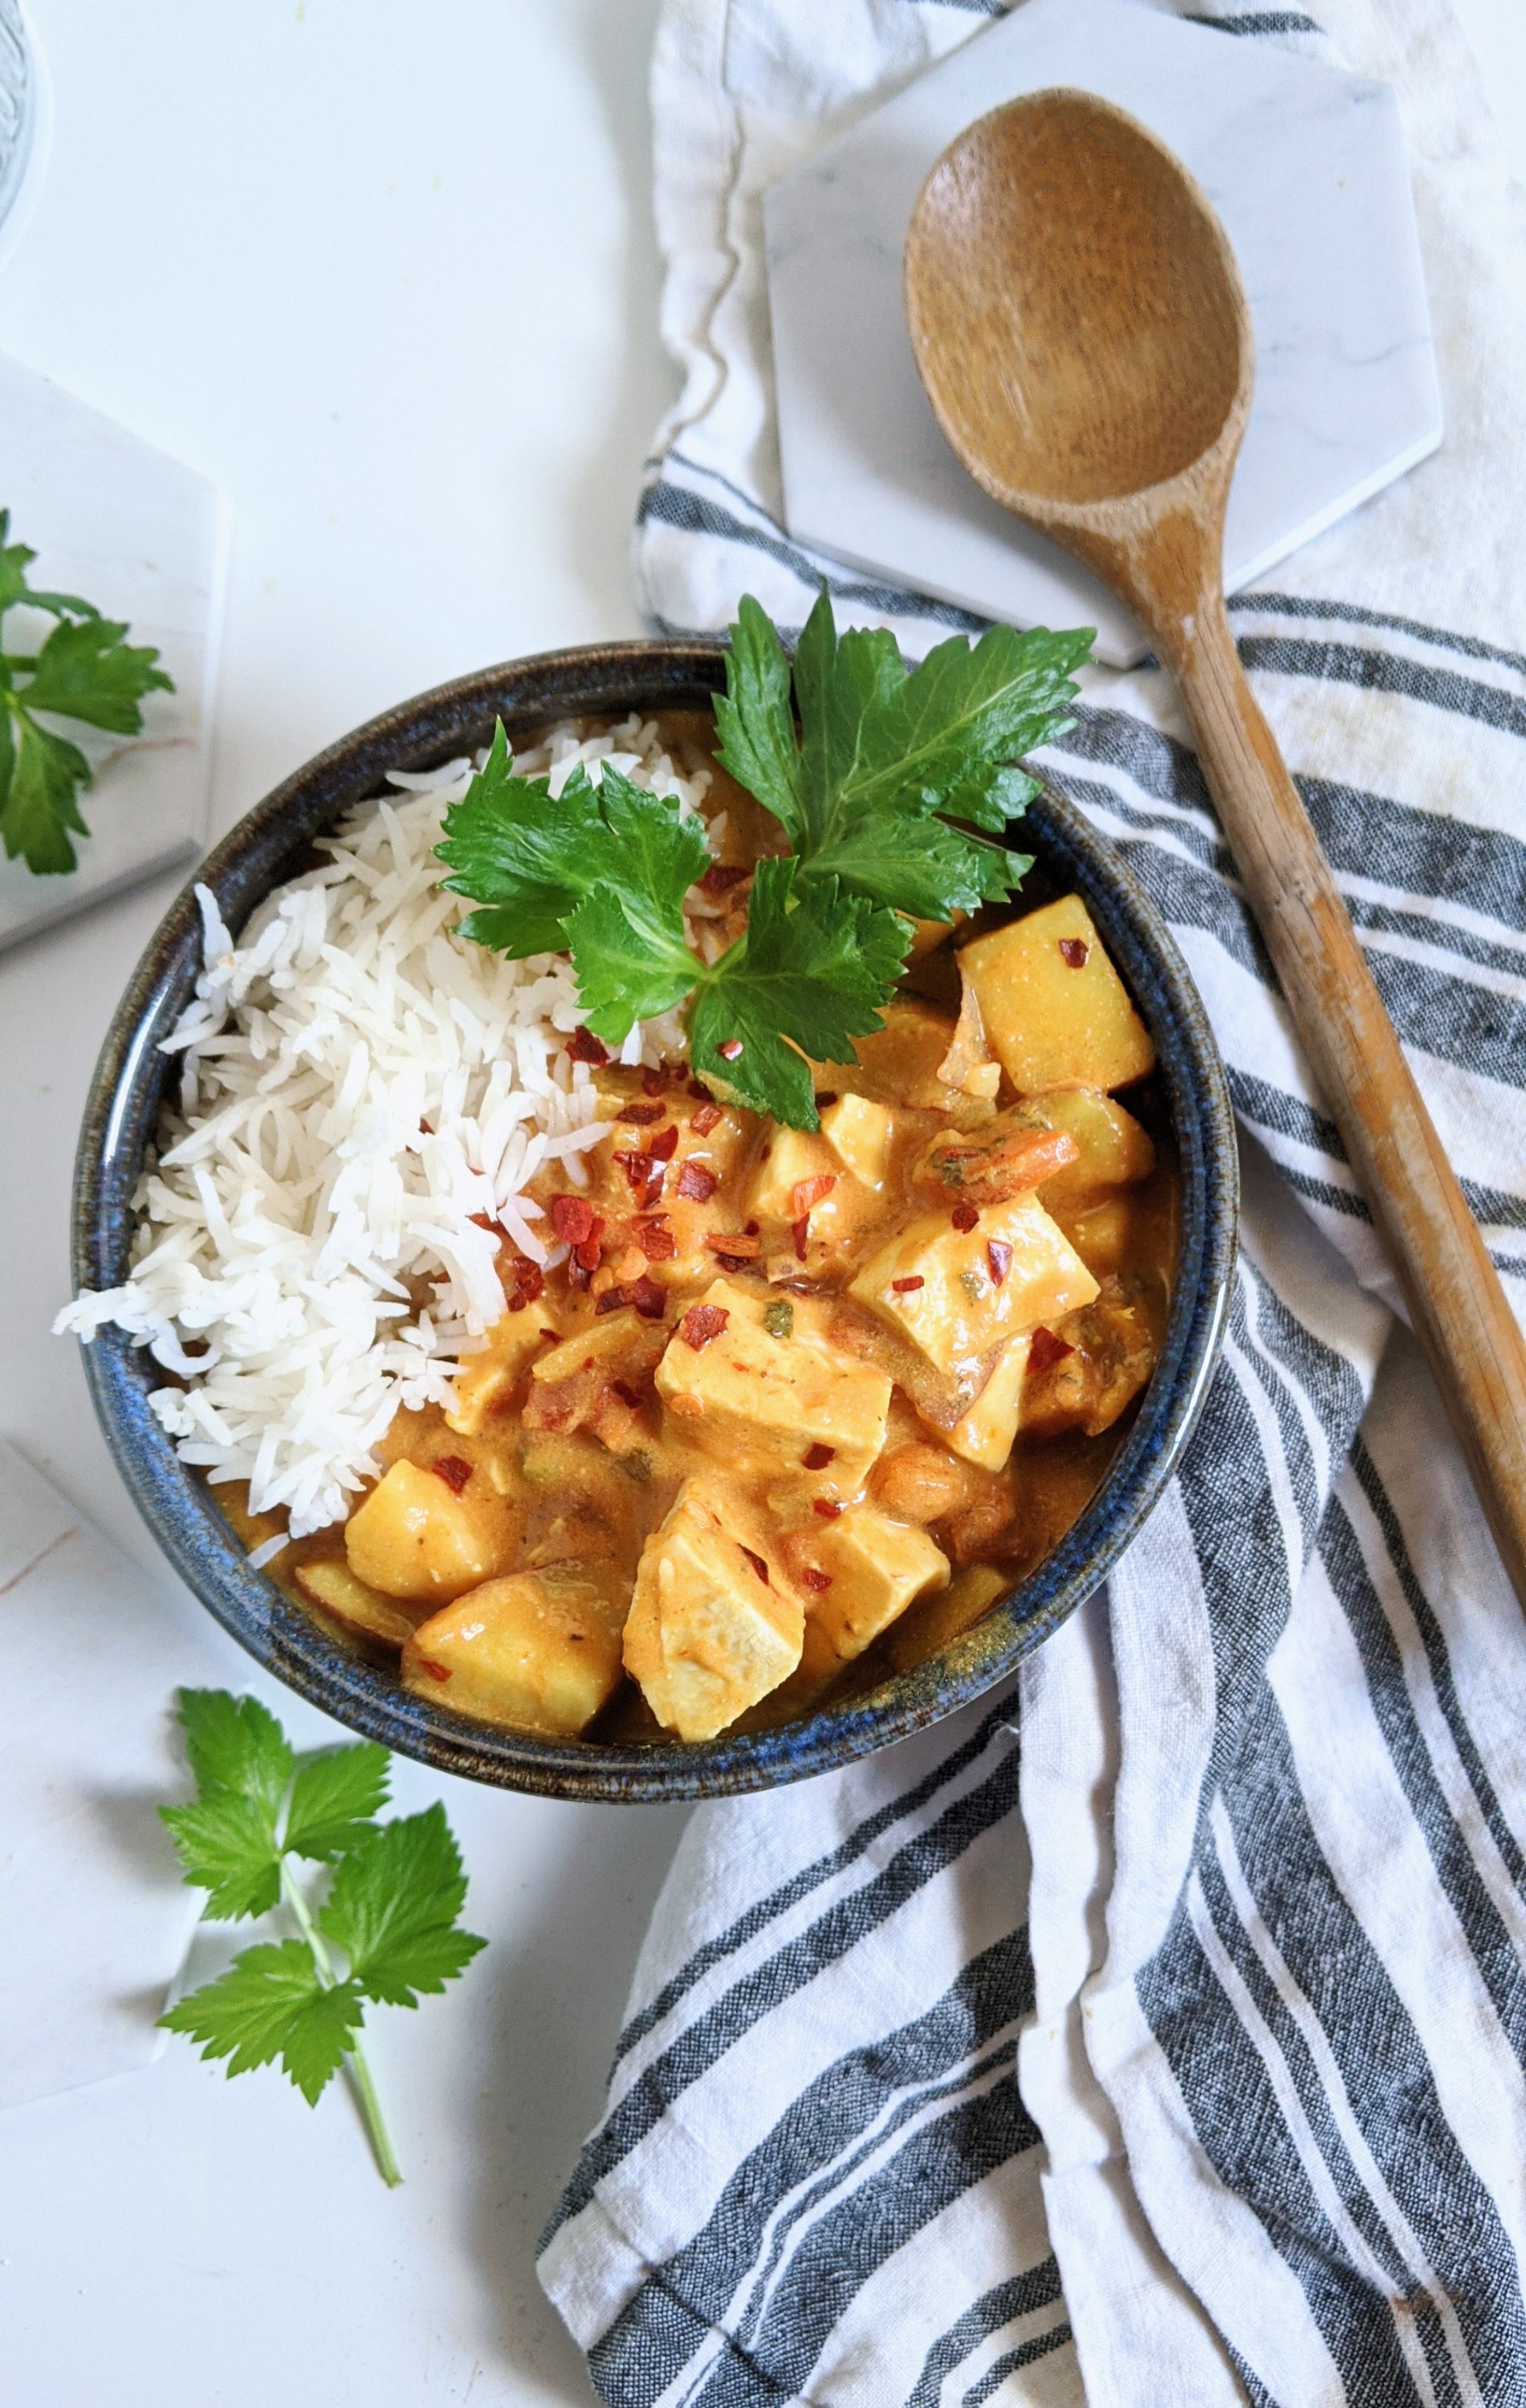 coconut curry tofu recipe one pot easy weeknight dinner recipes with coconut milk high protein vegan dinners recipe